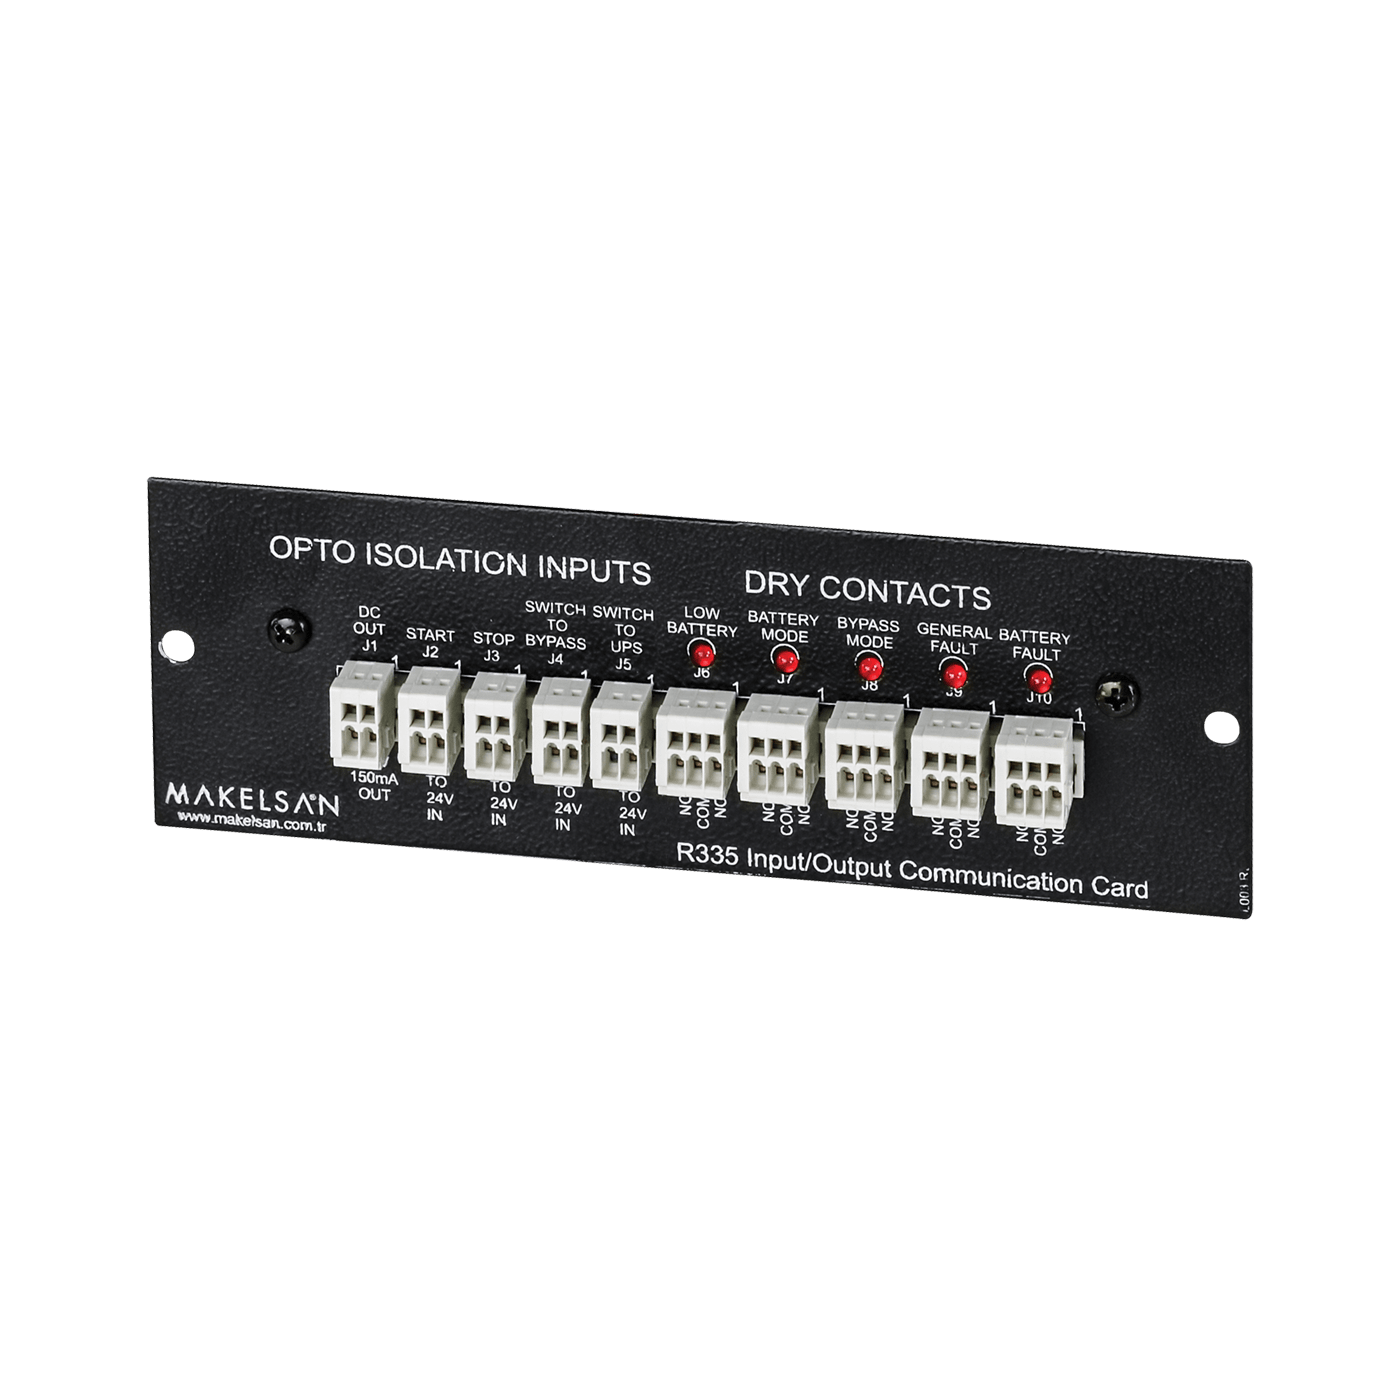 R335 Dry Contact (Relay) Card